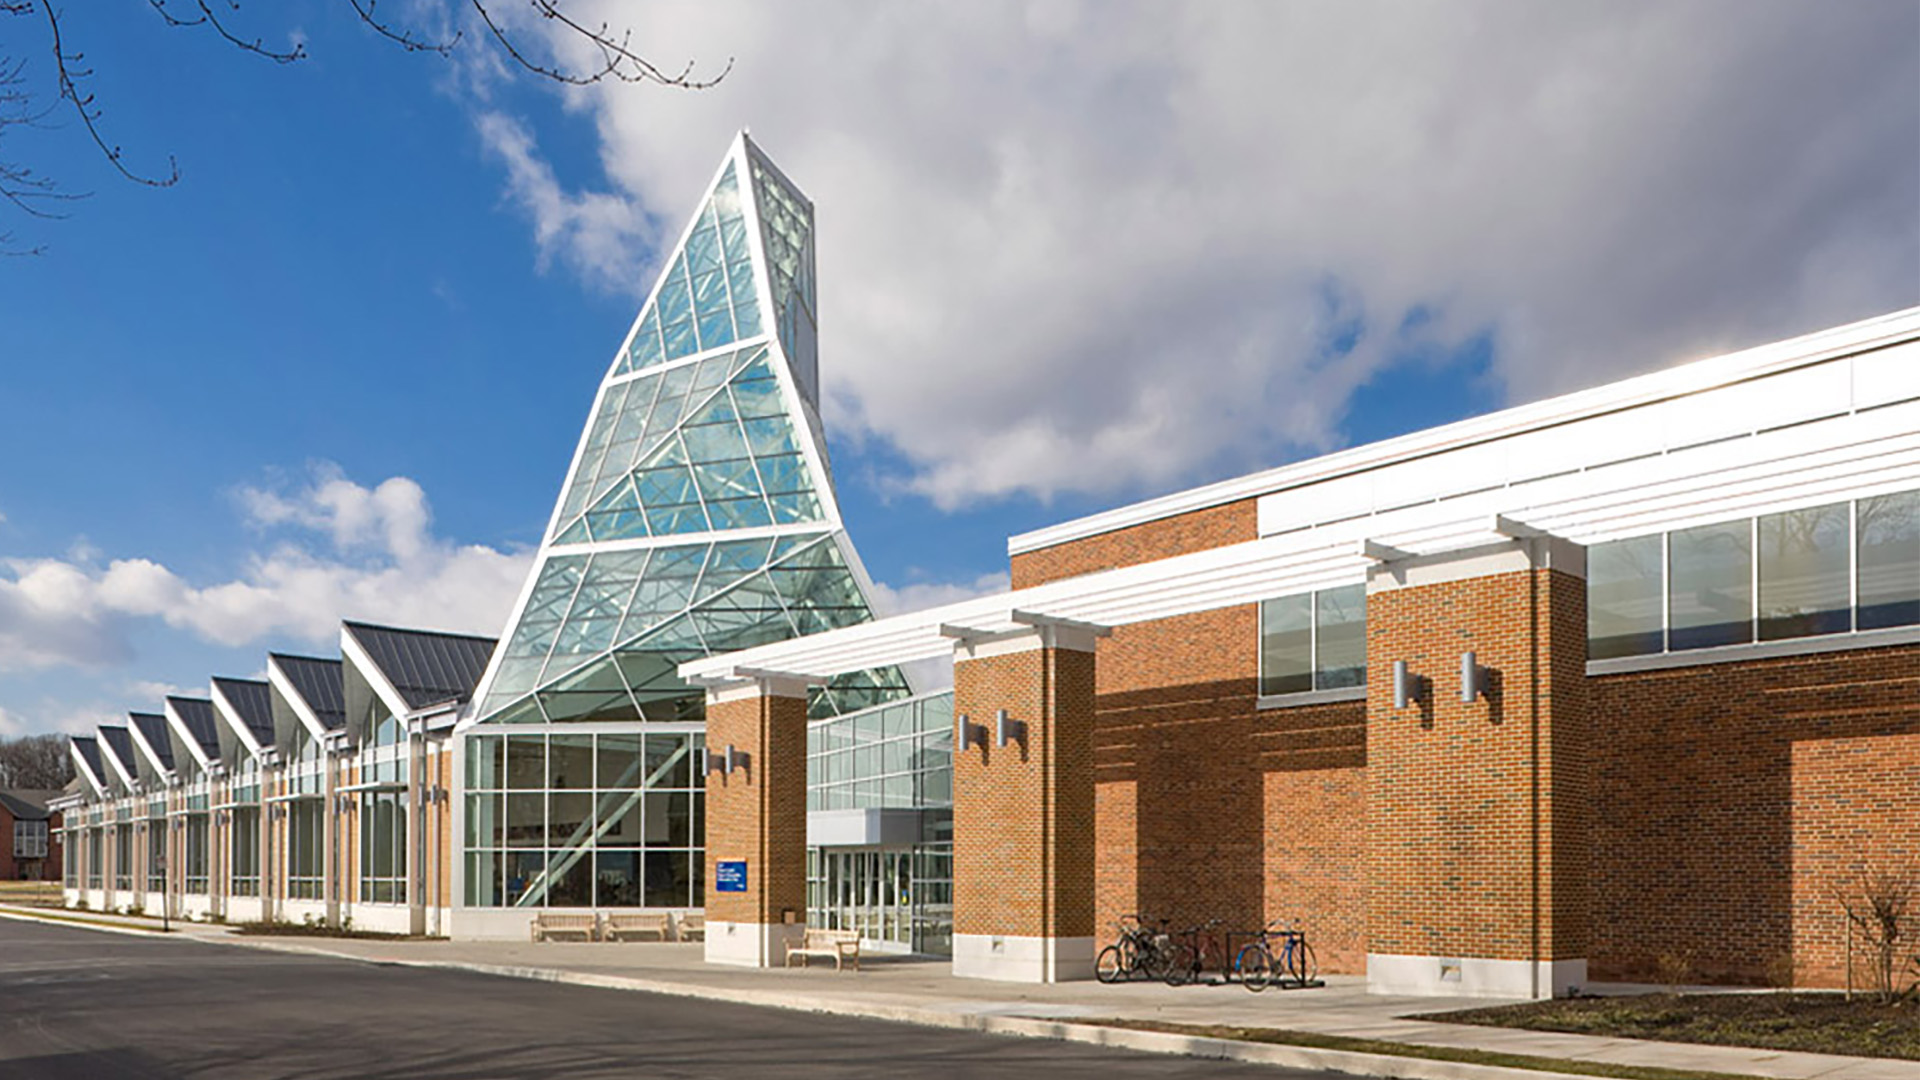 The John F. Jaeger Center for Athletics, Recreation & Fitness at Gettysburg College